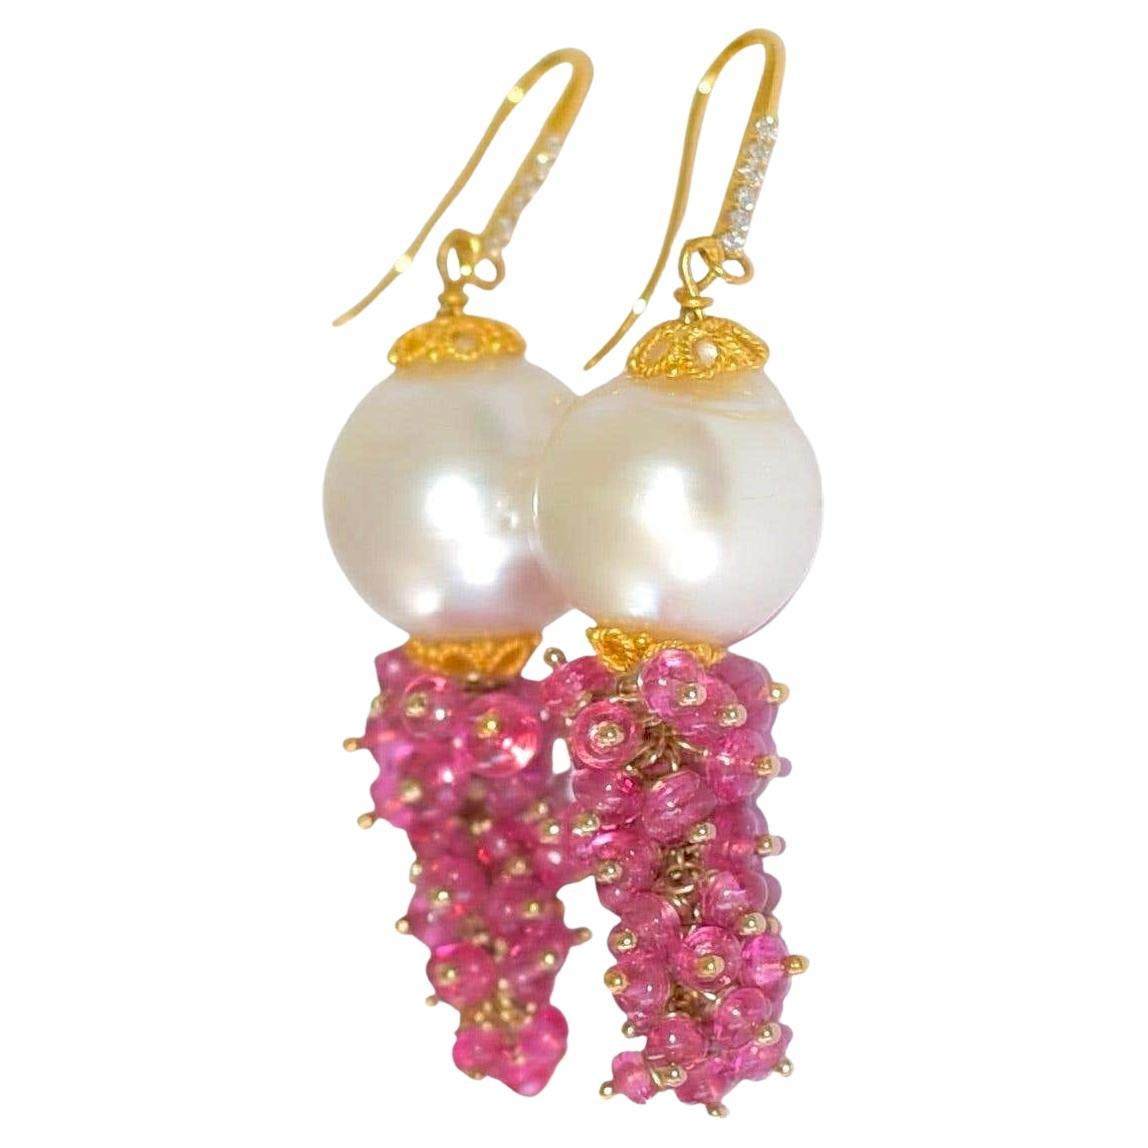 Neon Hot Pink Burmese Jedi Spinel, South Sea Pearl Earrings in 14K Solid Gold For Sale